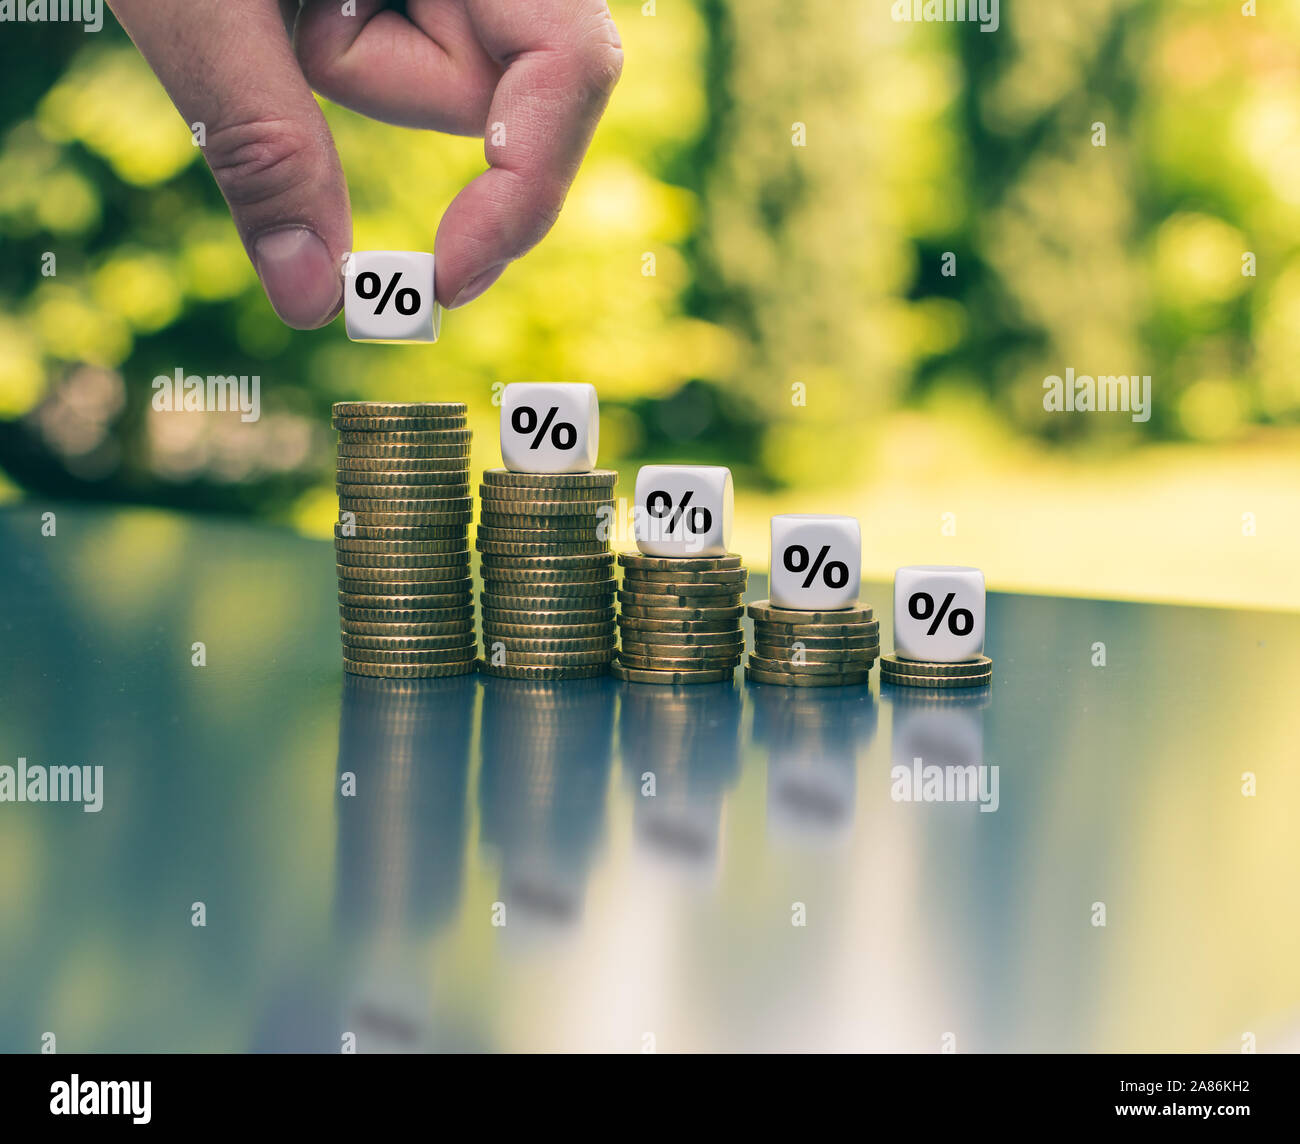 Dice with percentage symbols on decreasing high stacks of coins. Stock Photo